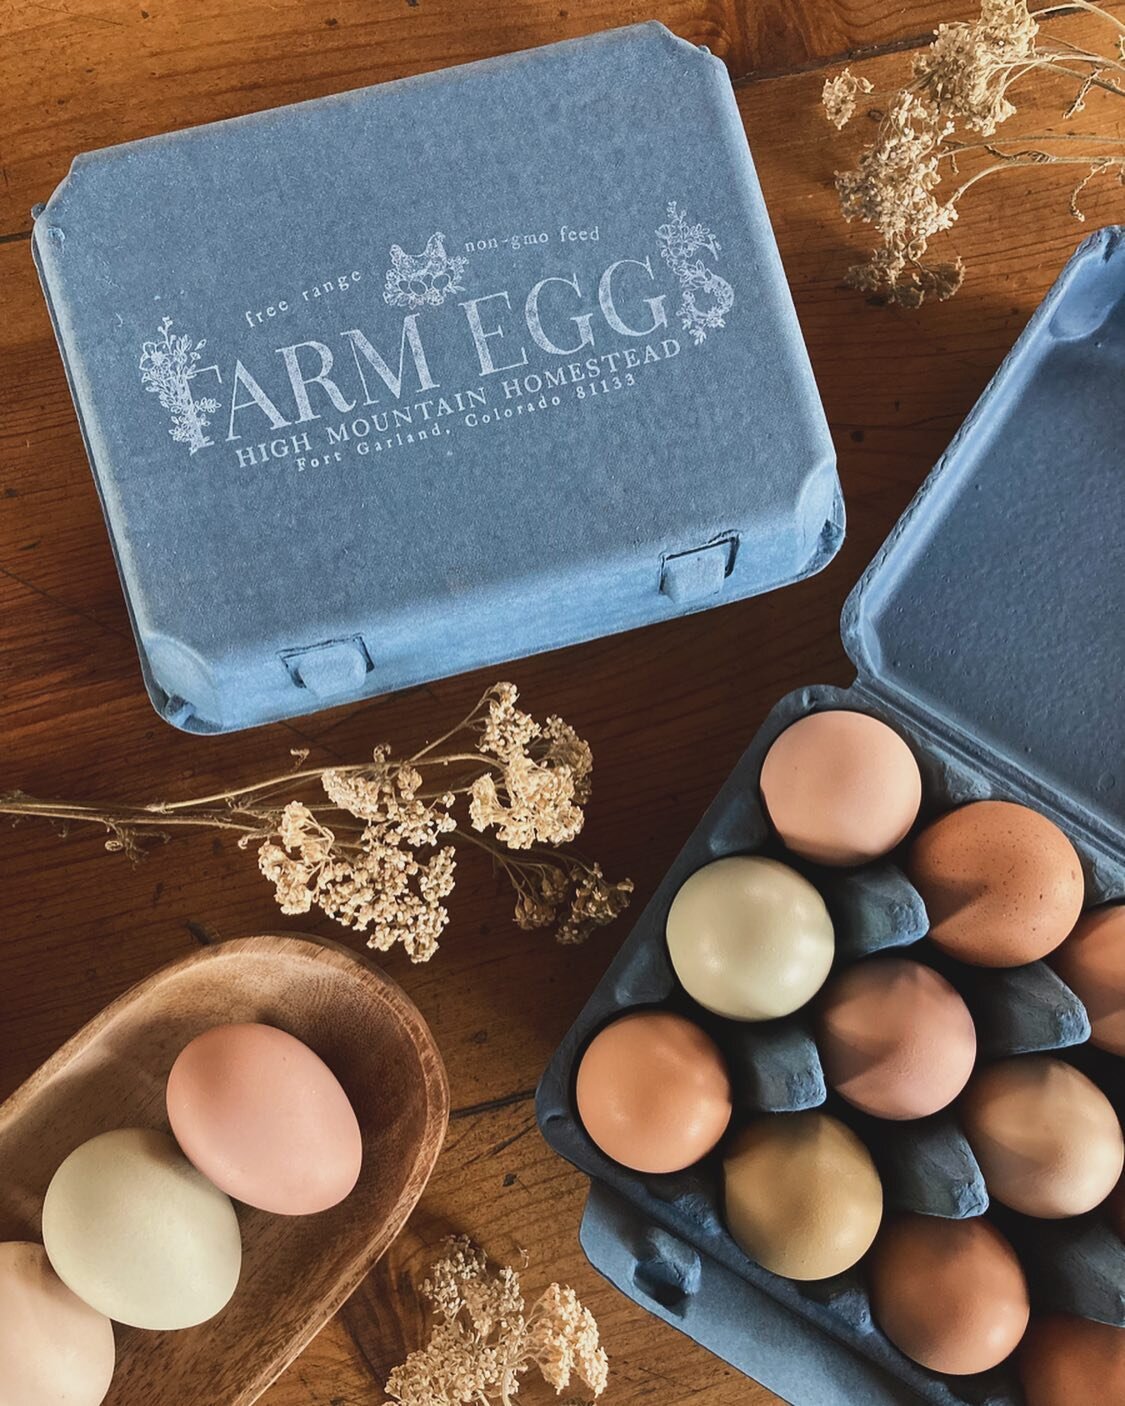 Created some hand-stamped egg cartons, what do you think? 💙 
This weeks egg delivery in Taos is tomorrow instead of today, let me know if you&rsquo;d like some, only a few dozen available! 
.
Customized stamp by @silverhomestead #eggrainbow #eastere